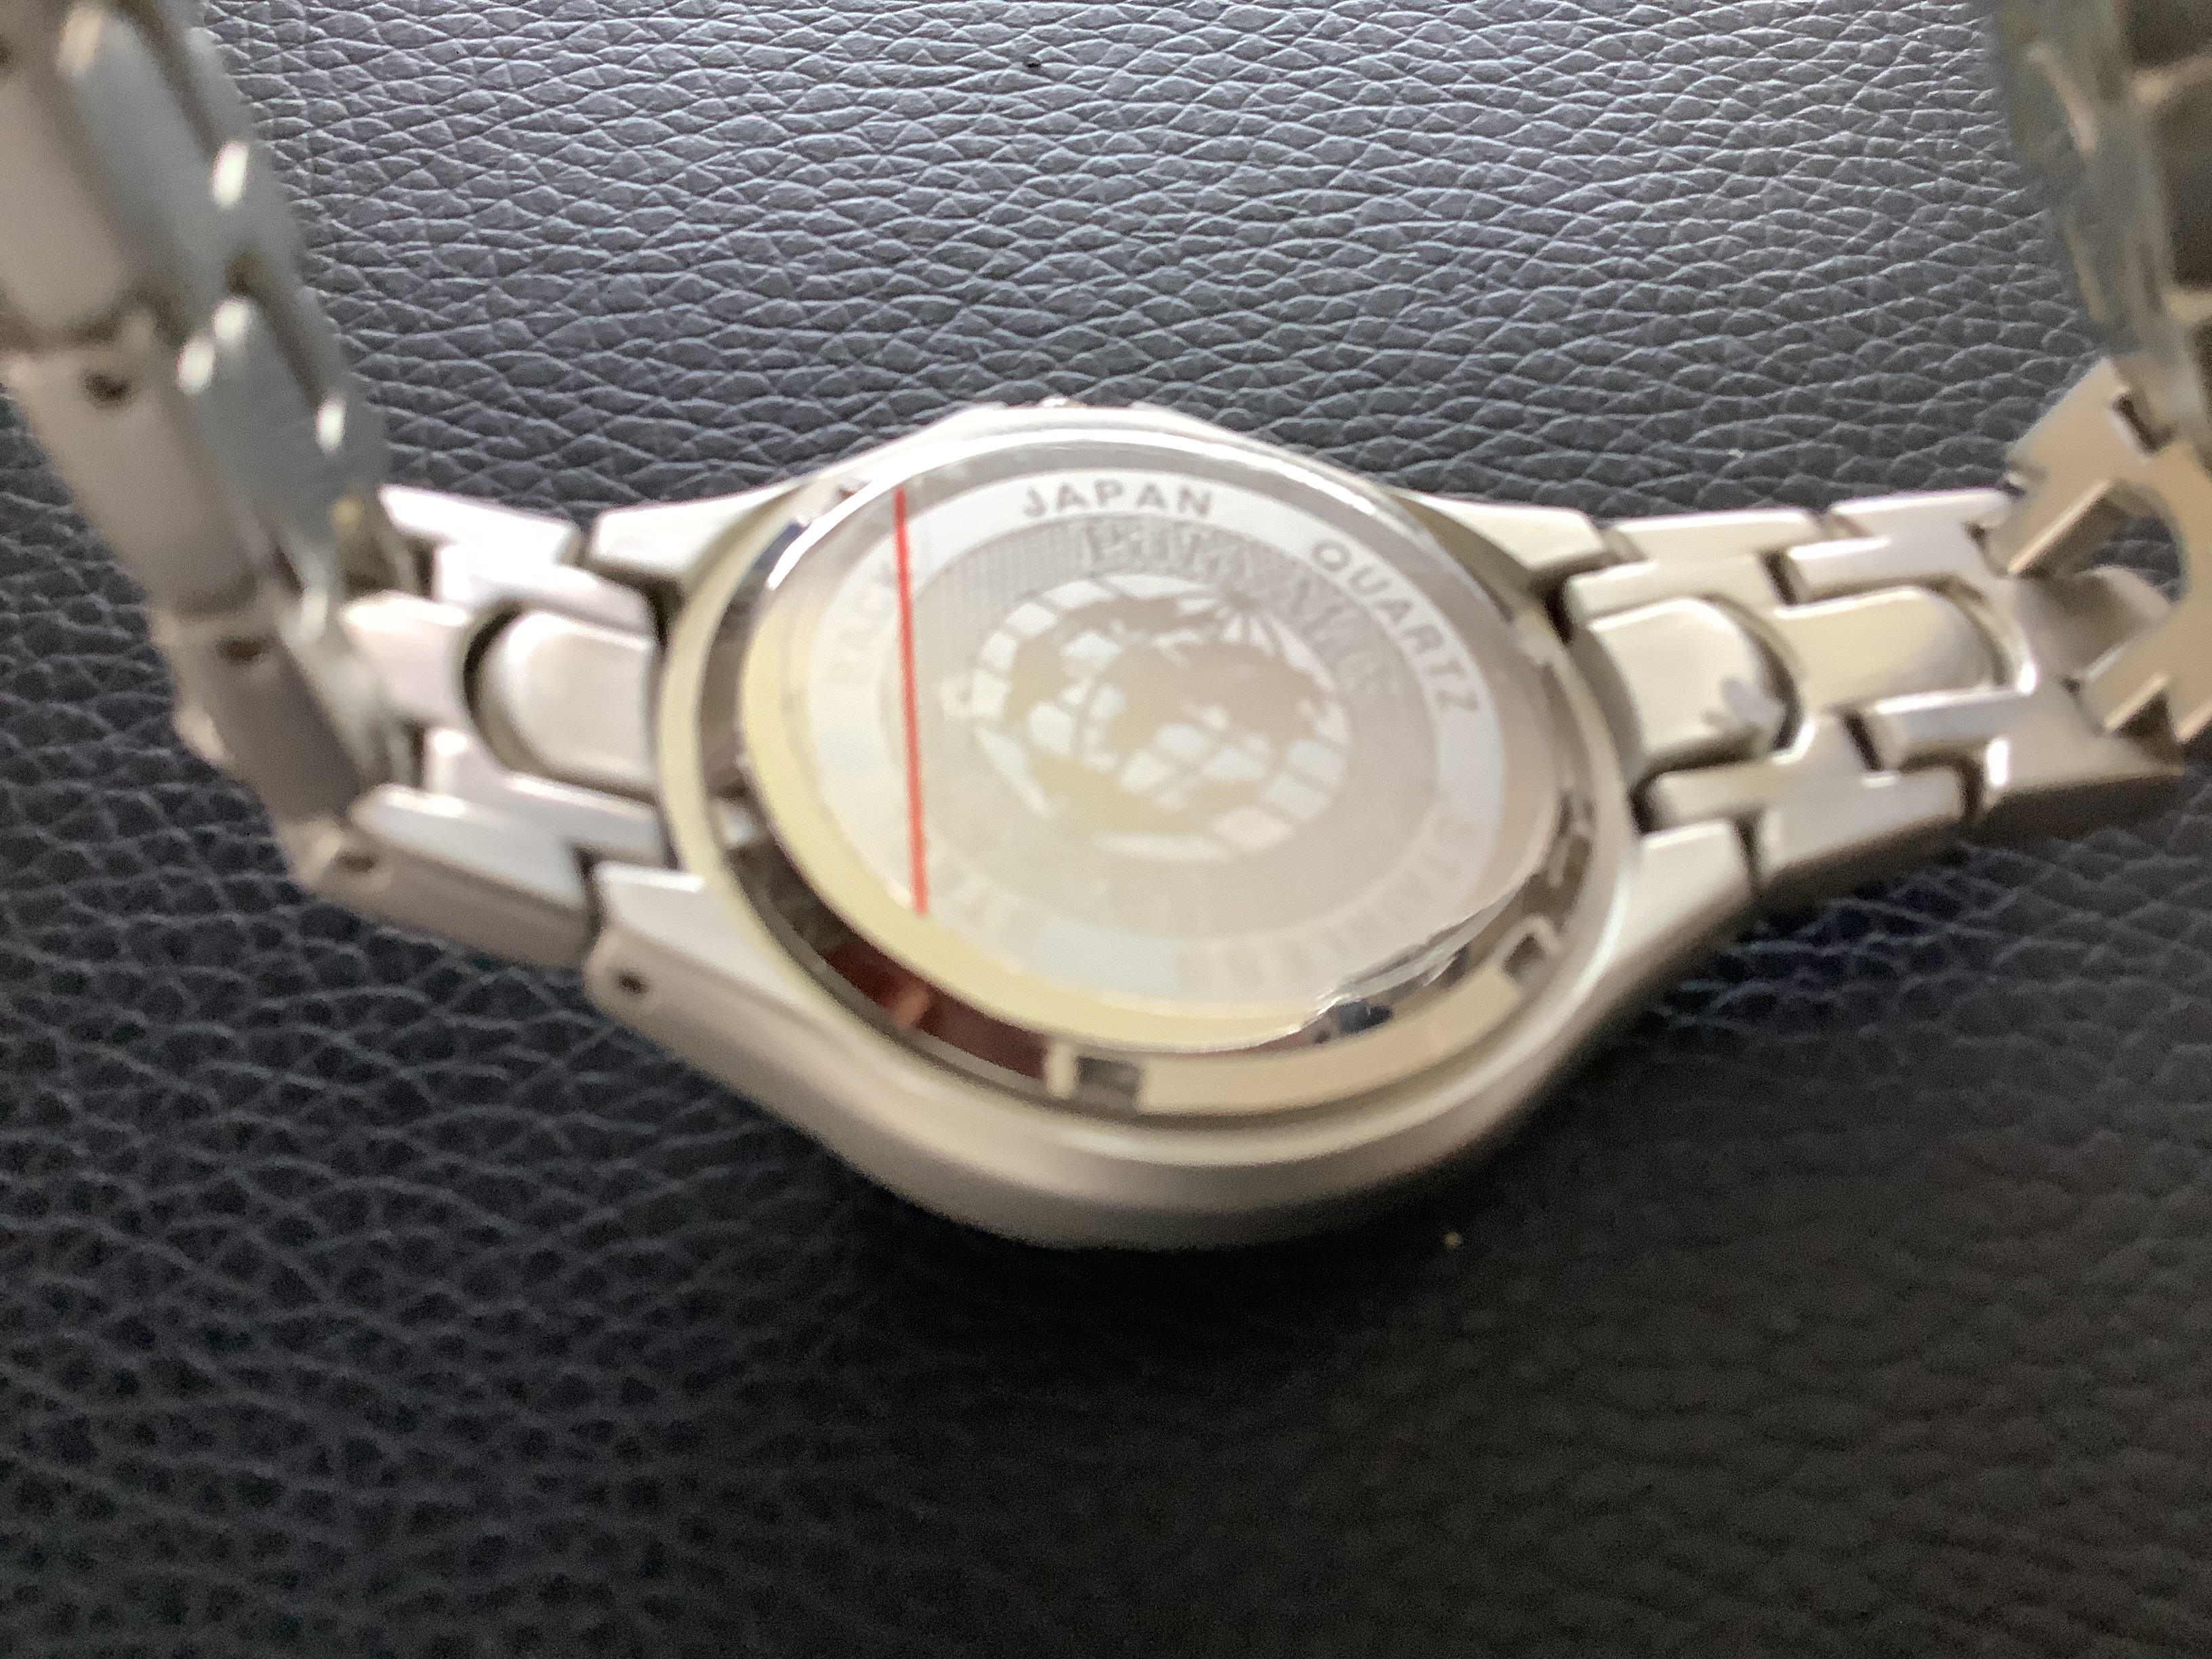 Polo Max Unisex 'As New' Wristwatch with mirror effect Face (GS 145) - Image 6 of 6